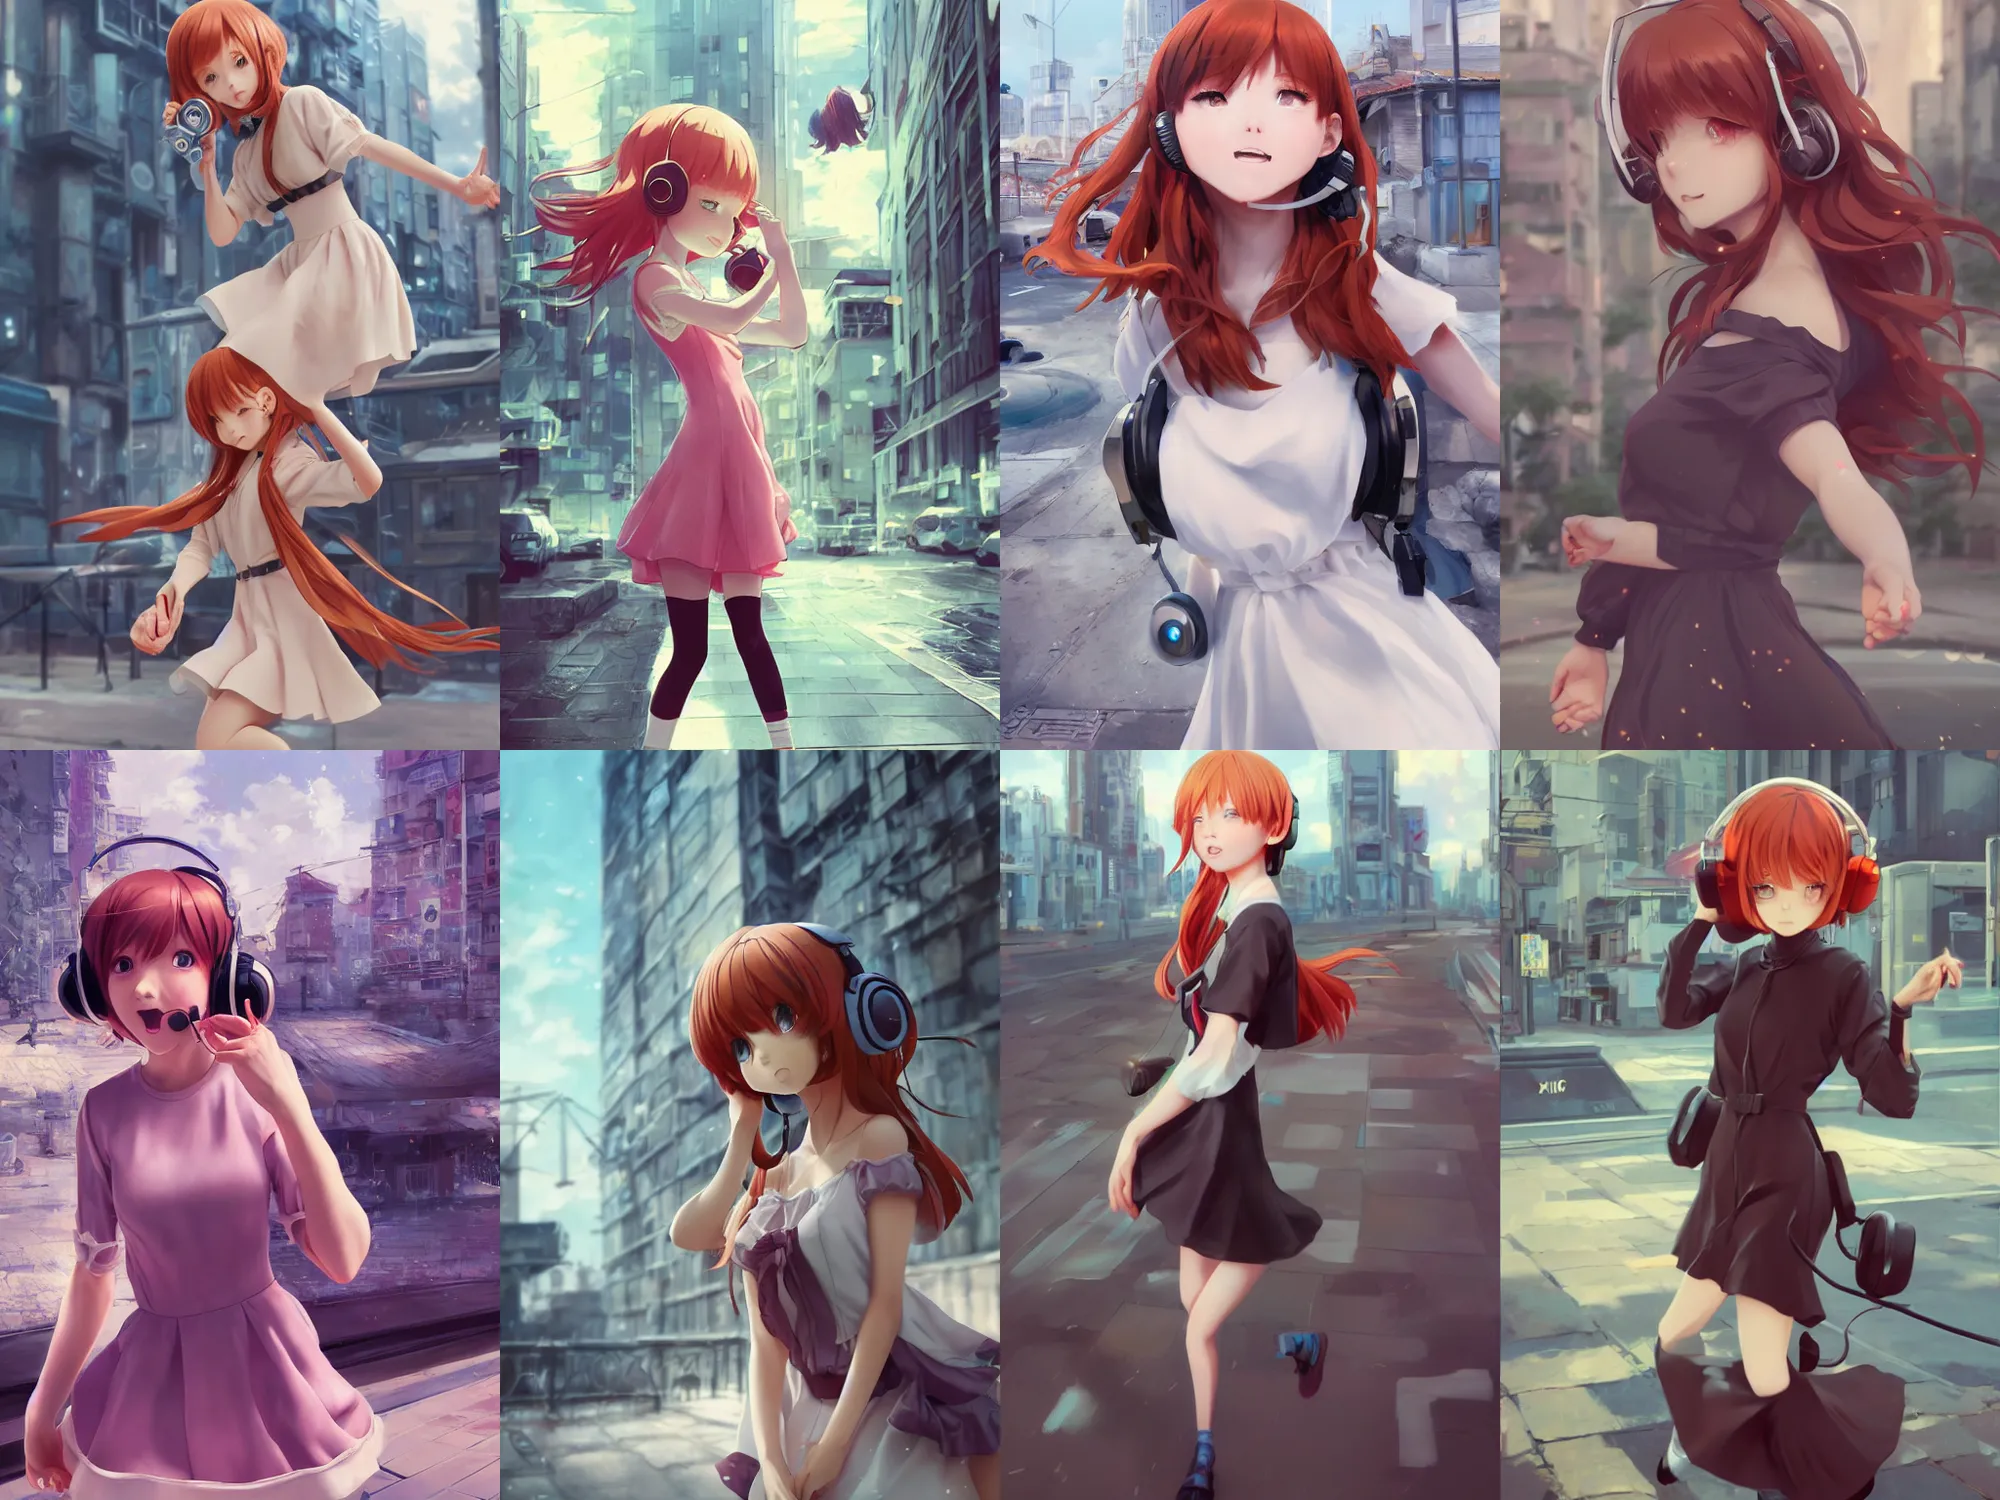 Prompt: Very complicated dynamic composition, realistic anime style at Pixiv CGSociety by WLOP, ilya kuvshinov, trending on artstation. Zbrush sculpt colored, Octane render in Maya and Houdini VFX, cute young redhead girl in motion, she expressing joy, wearing dress, headphones, silky hair, stunning deep eyes. In cityscape. Very expressive and inspirational. Amazing textured brush strokes. Cinematic dramatic atmosphere, soft volumetric studio lighting.